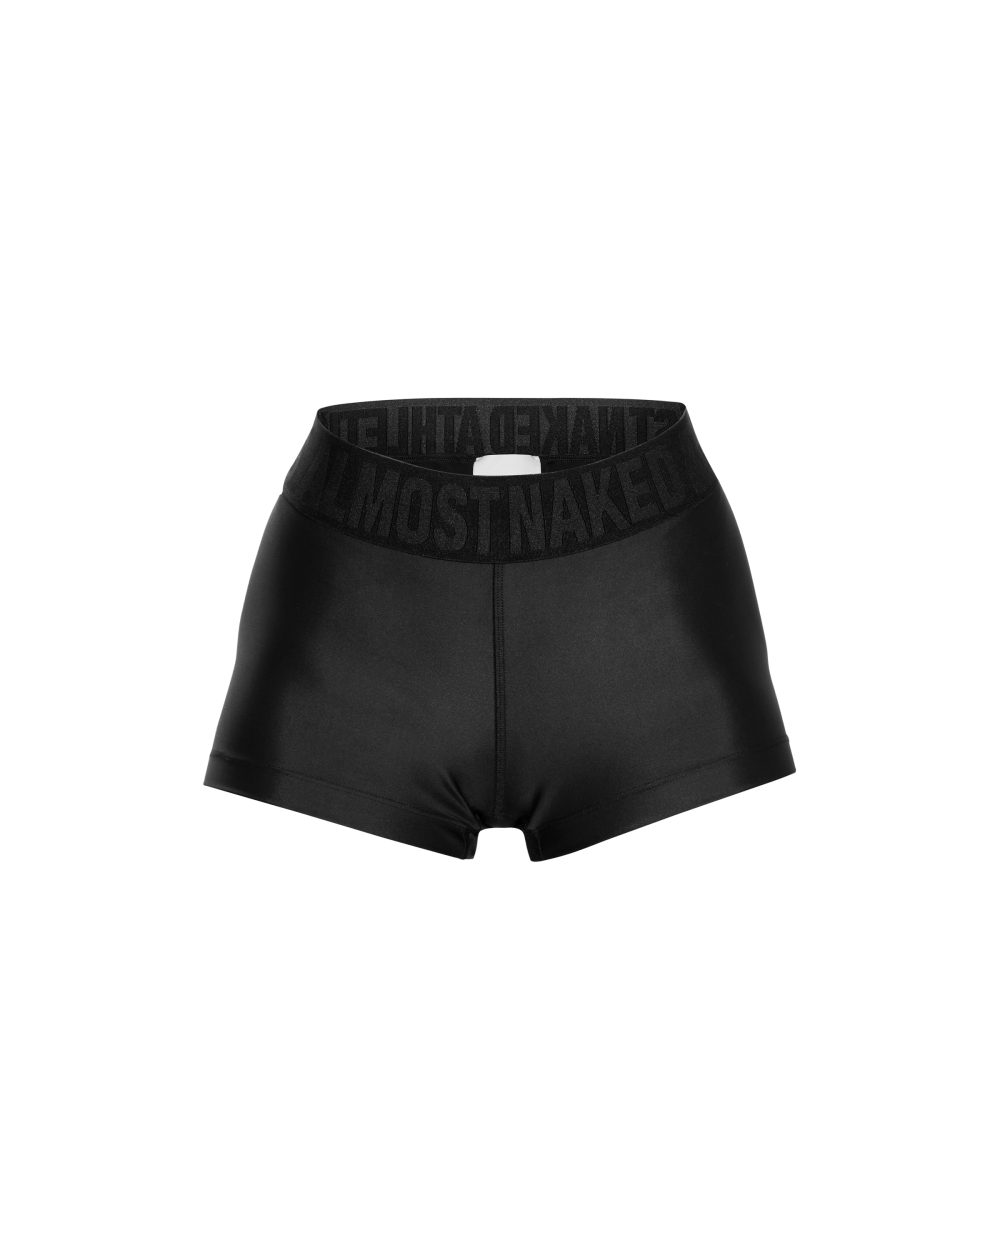 Gym shorts women's  Almost Naked Athletics